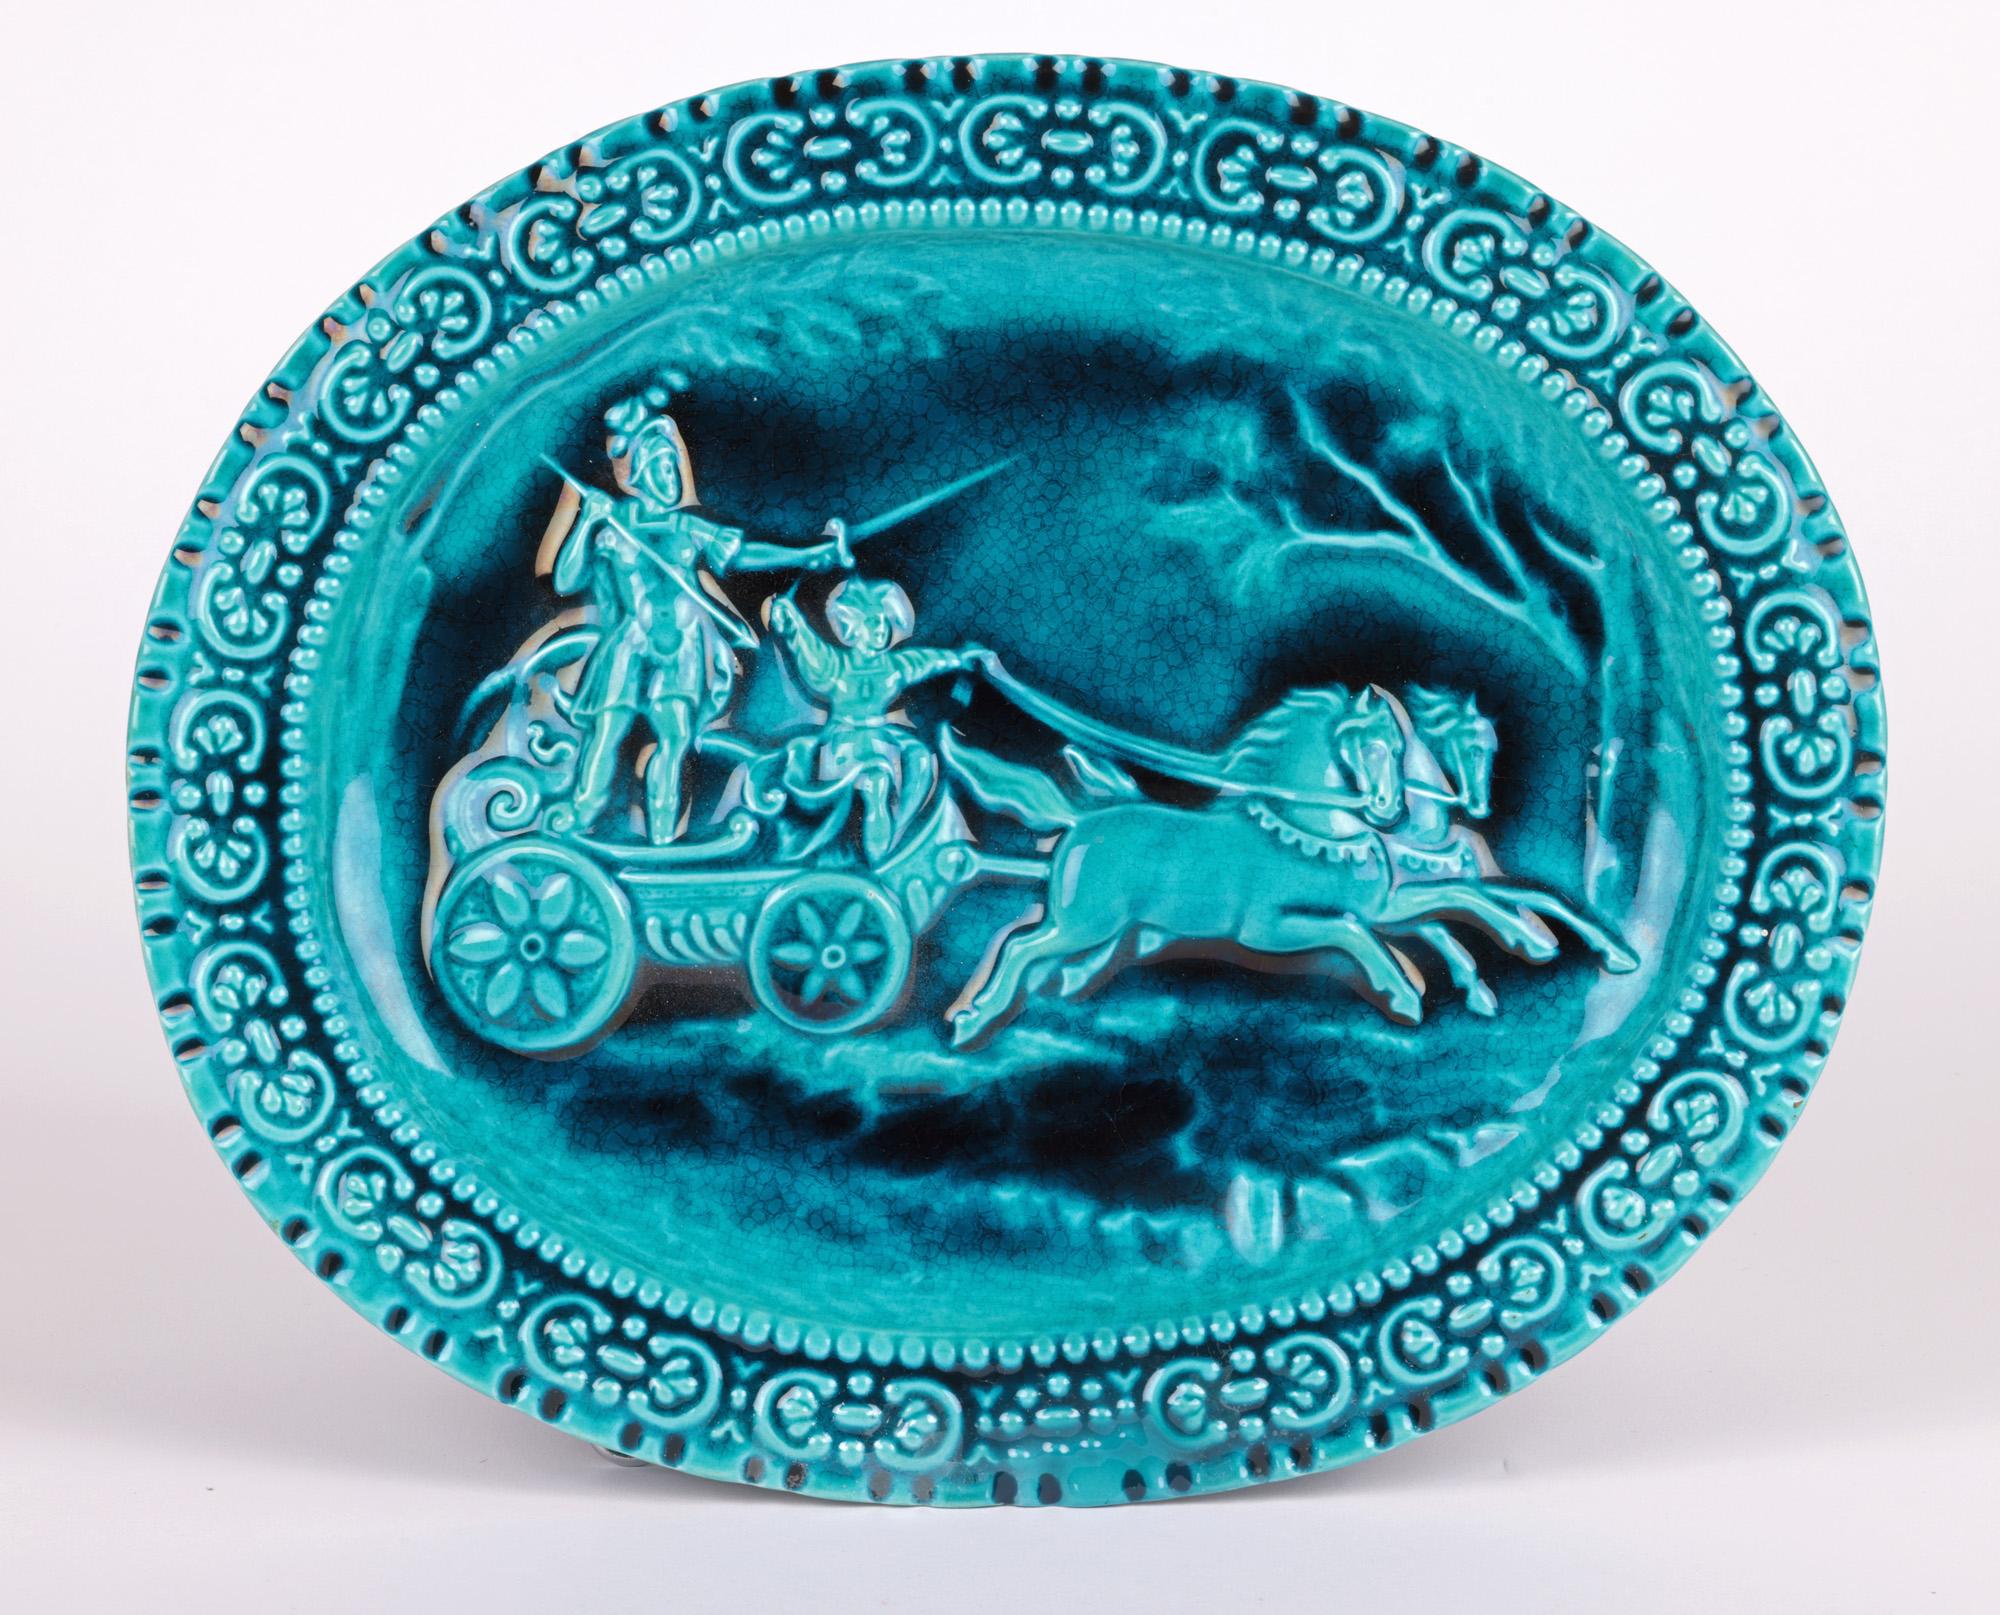 Maw & Co Walter Crane Majolica Chariot Art Pottery Plaque For Sale 7